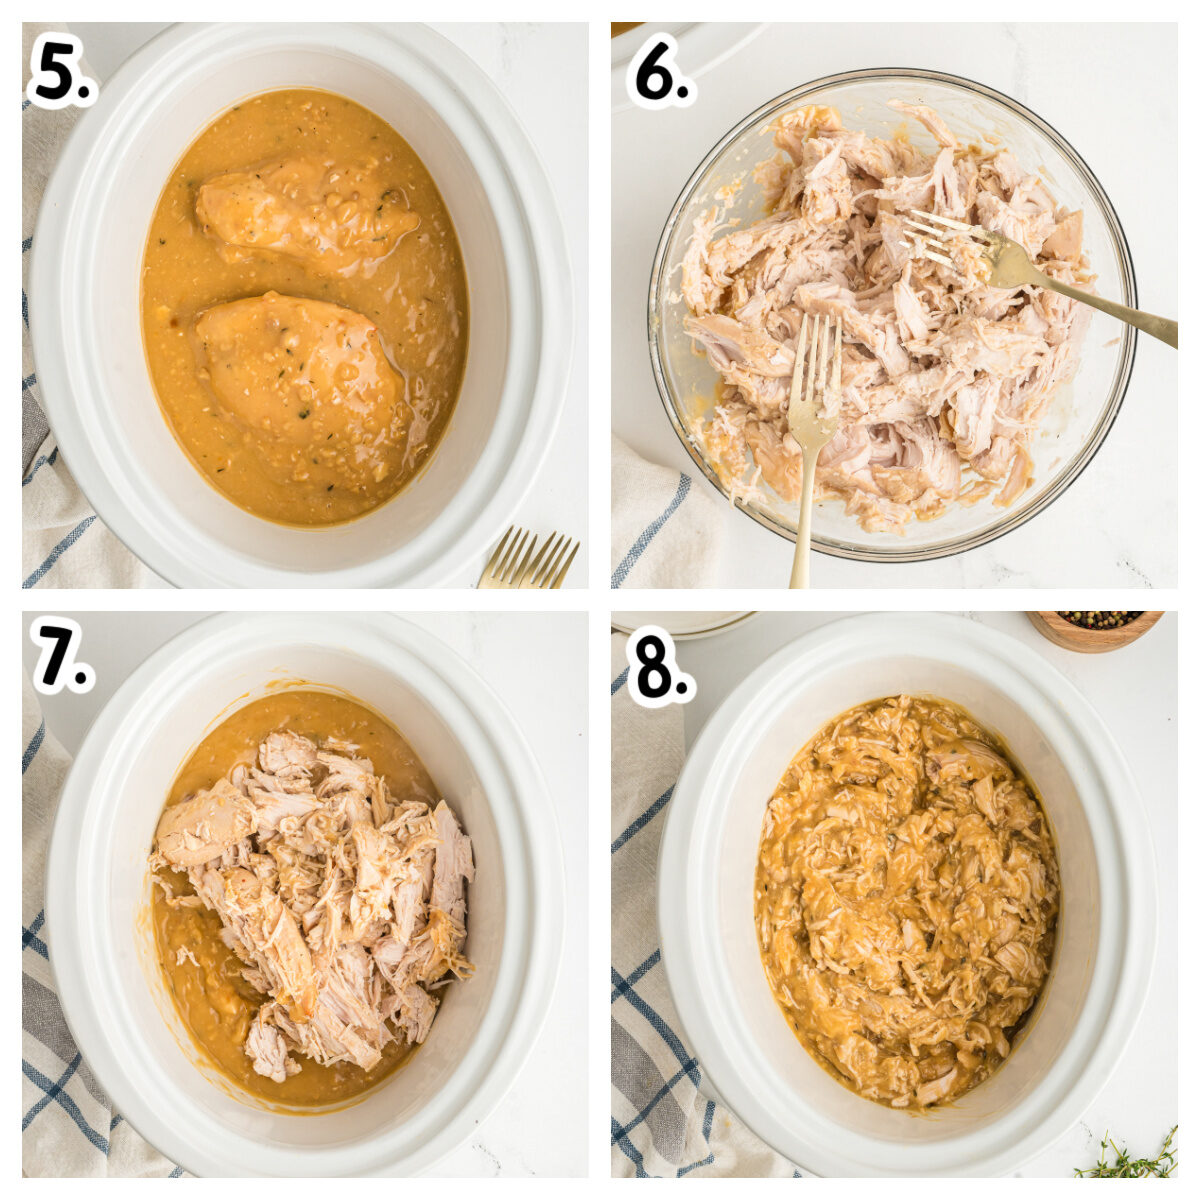 4 images showing done cooking turkey and how to shred.